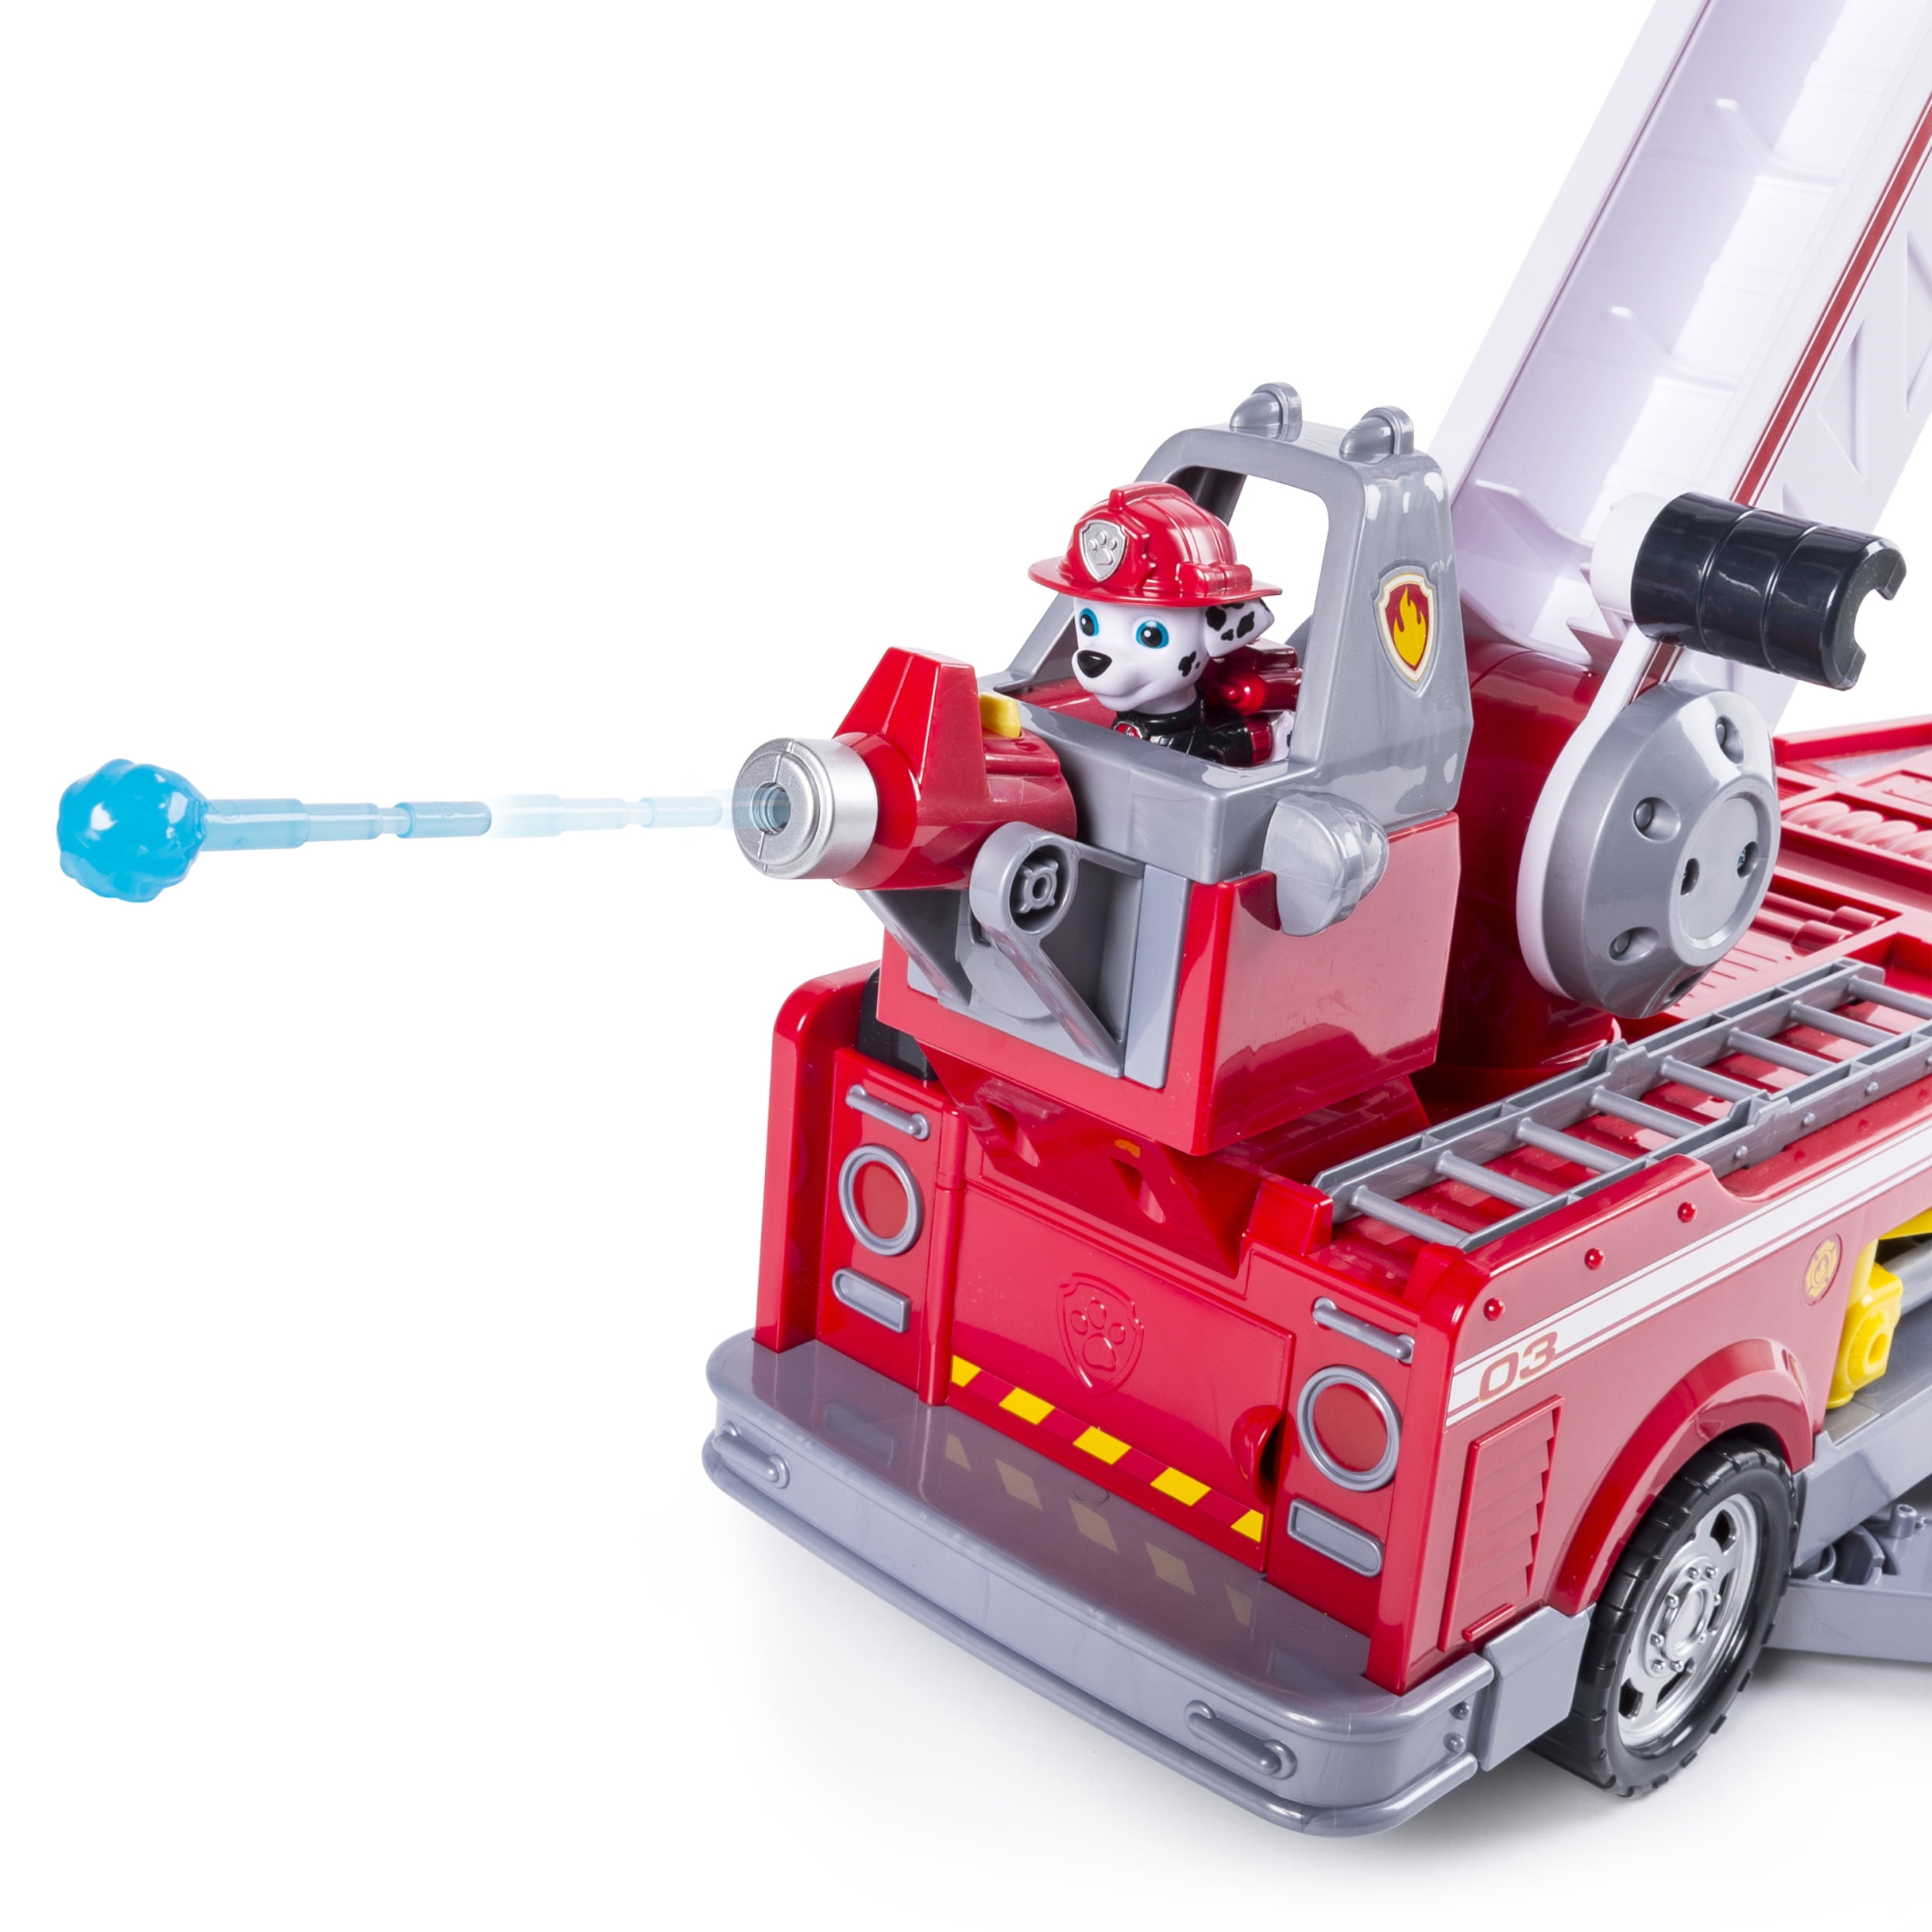 paw patrol rescue fire truck playset